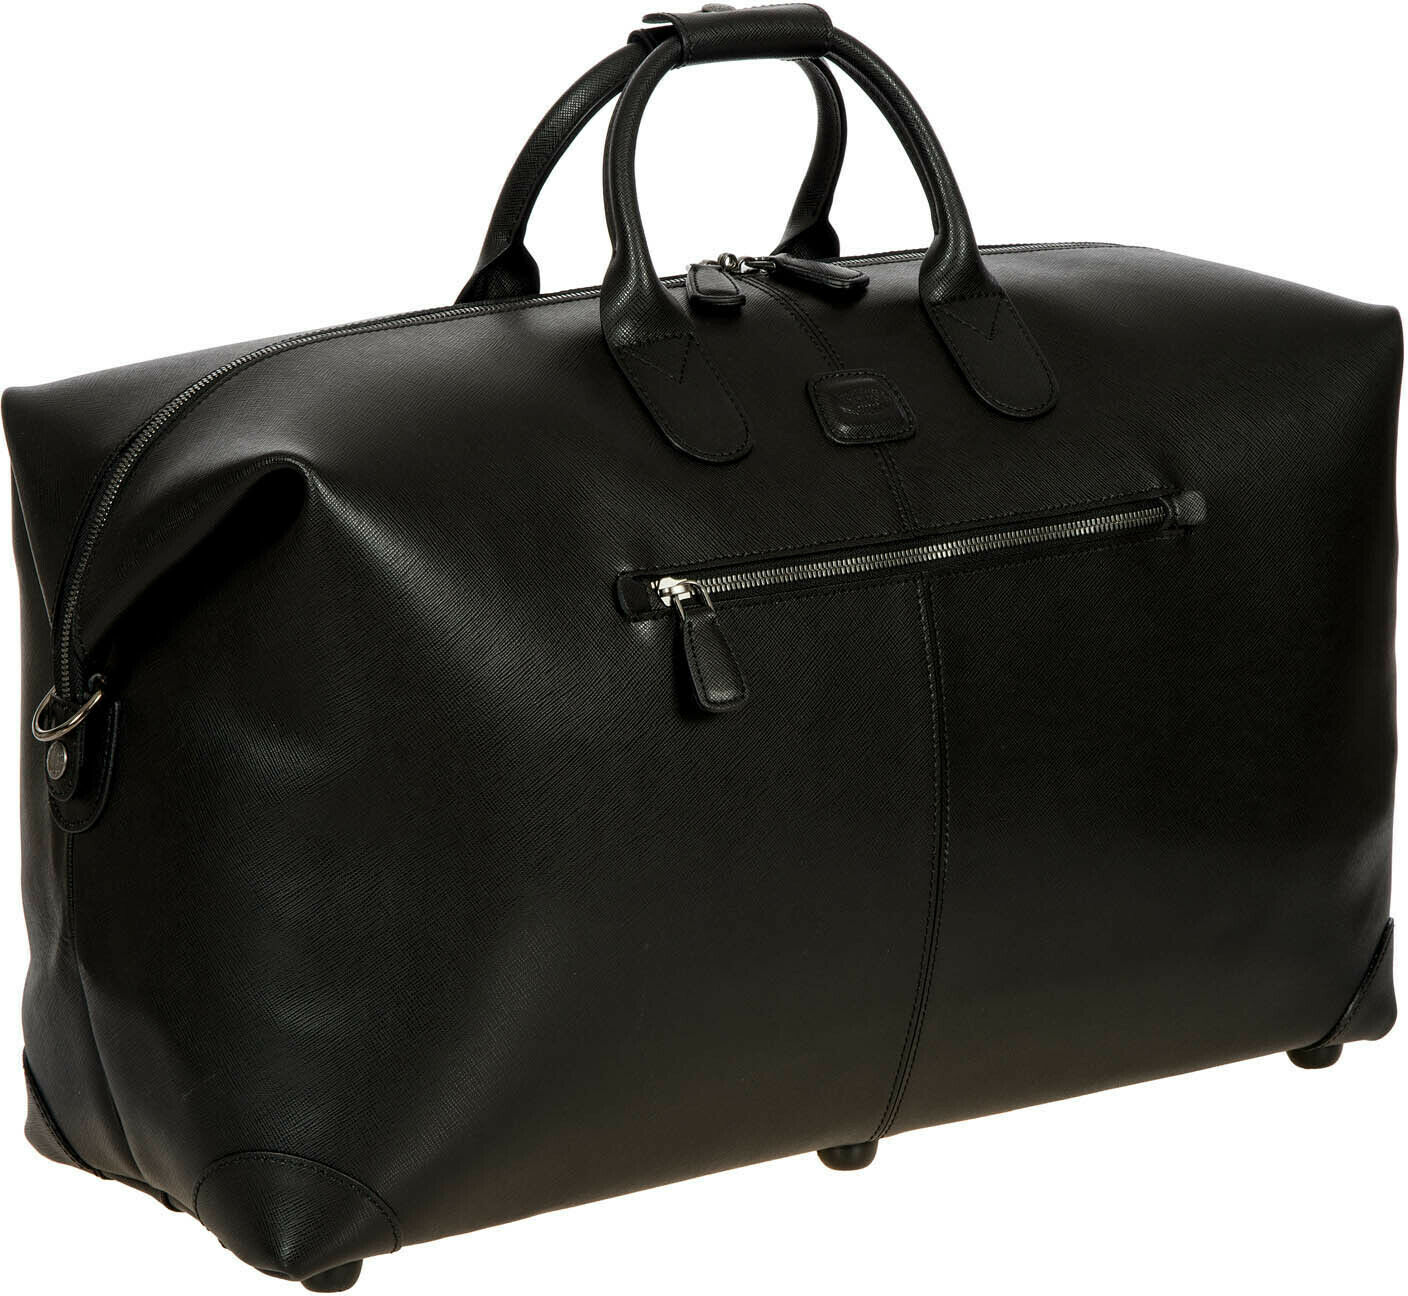 BRIC'S Made In Italy Luxurious Black Leather Travel Bag Week End Bag ...